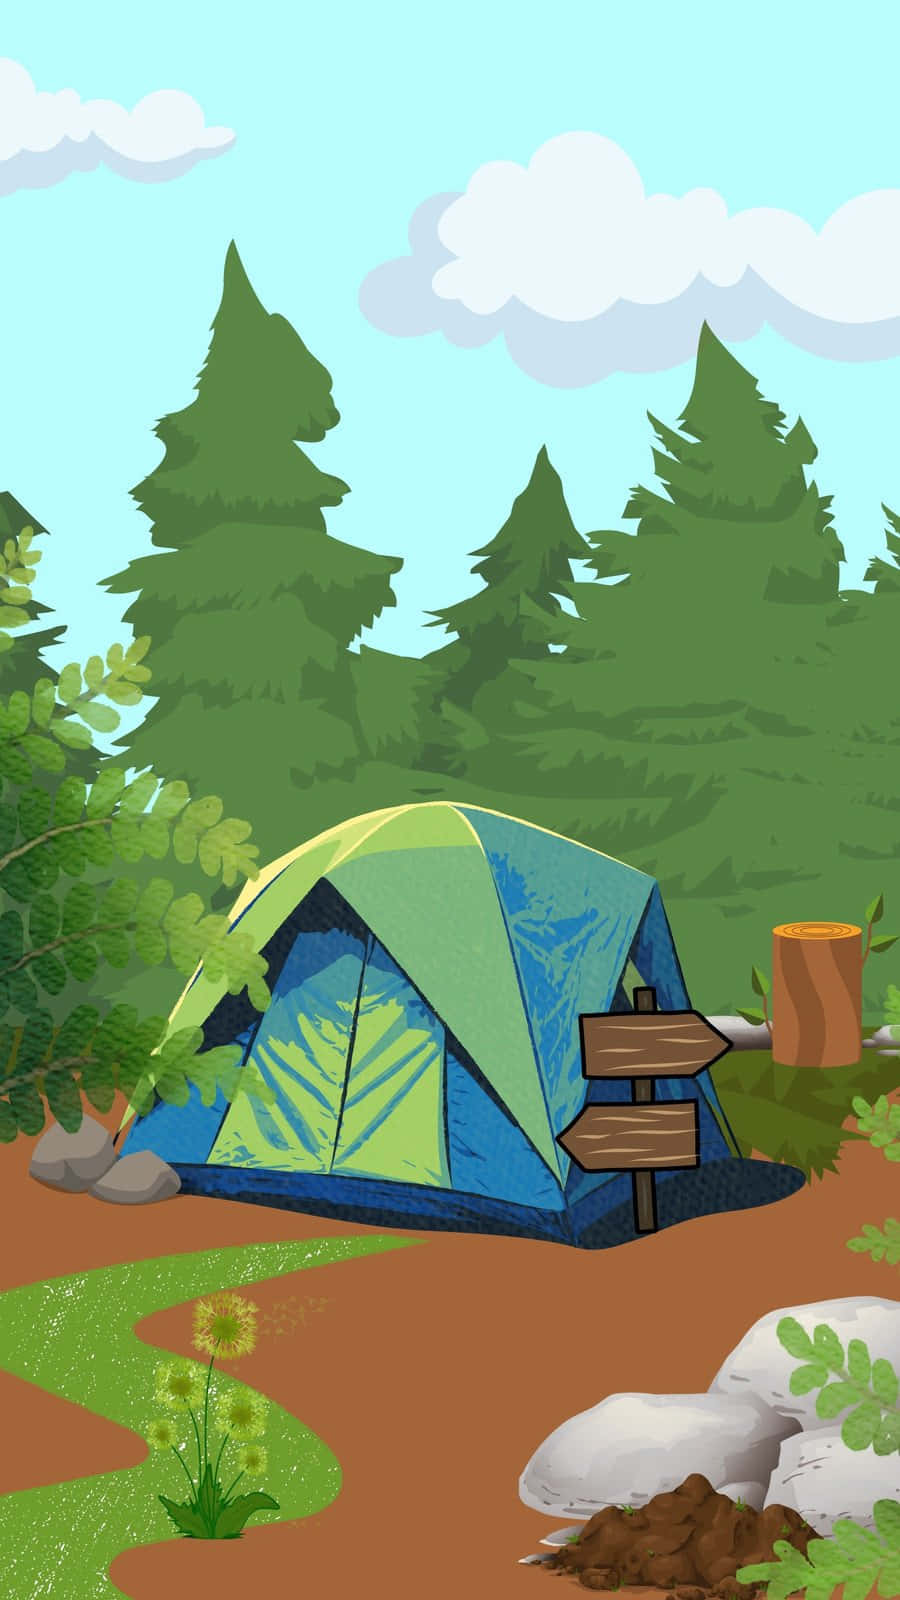 Connect with Nature through Camping